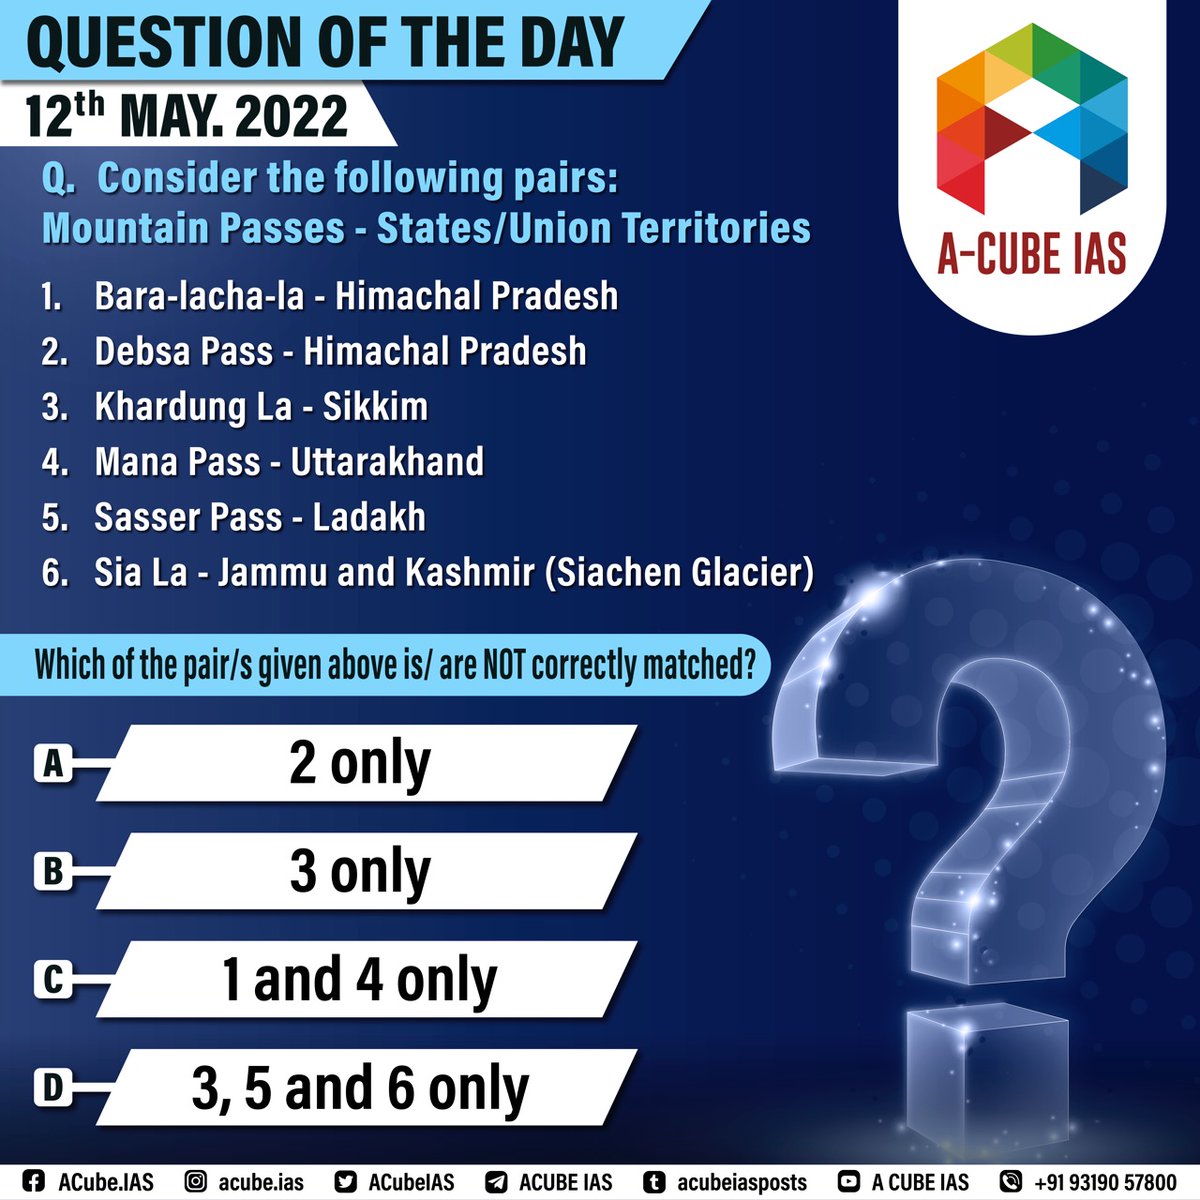 12th May 2022 
acubeias.com/question-of-th… 

NEW DIMENSION TO IAS ASPIRATIONS 
A3 : 𝗔𝗦𝗣𝗜𝗥𝗘 | 𝗔𝗧𝗧𝗘𝗠𝗣𝗧 | 𝗔𝗖𝗖𝗢𝗠𝗣𝗟𝗜𝗦𝗛 

#Prelims #MockTest #Evaluation #upscaspirants #ias #questionoftheday #qod #upscprelims #upscias #iasexam #paper1 #generalstudies #prelimsfacts